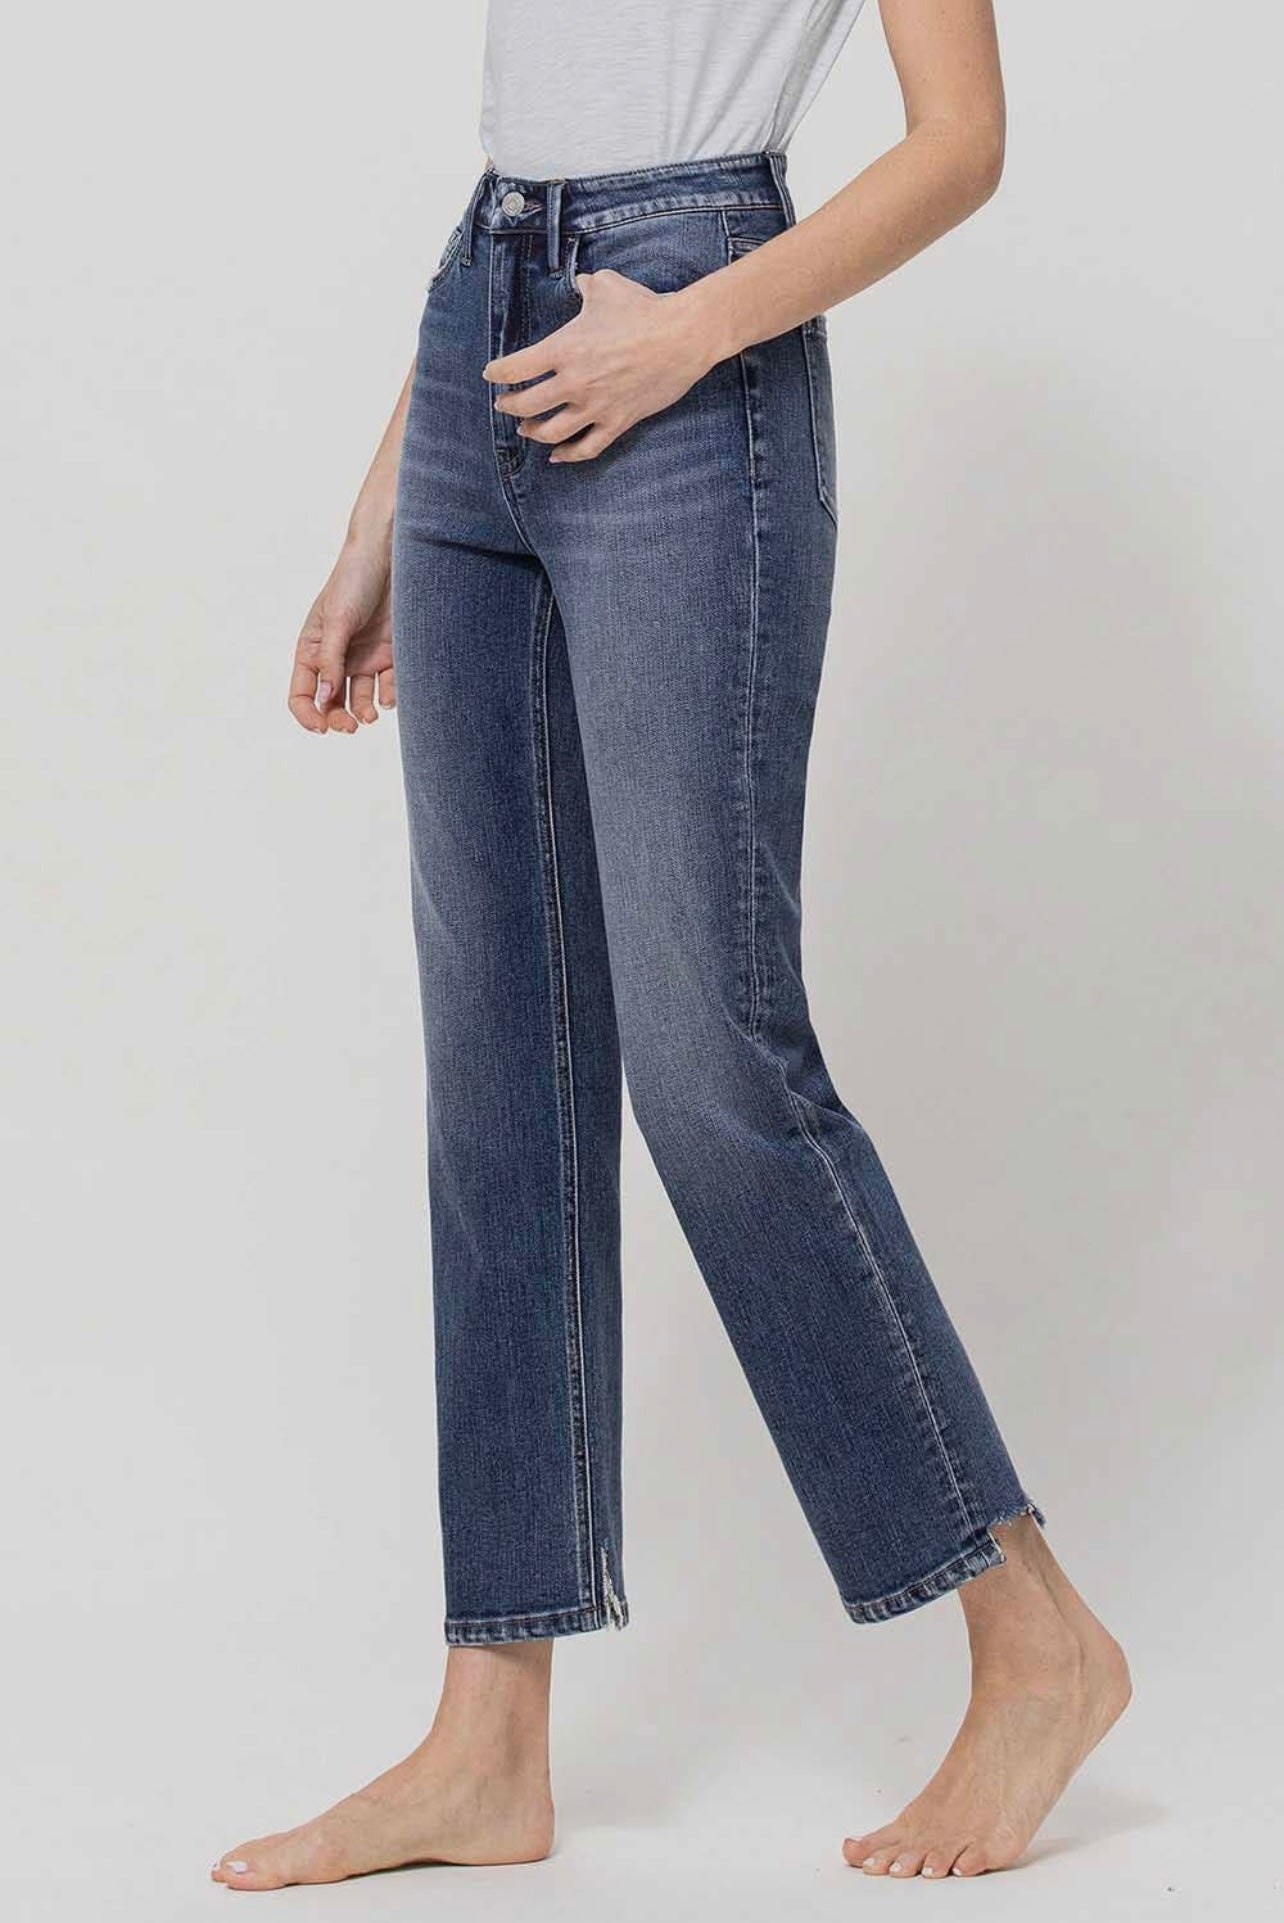 Flying Monkey Distressed High Rise Stretch Ankle Straight Jean- SALE ITEMS ARE FINAL SALE